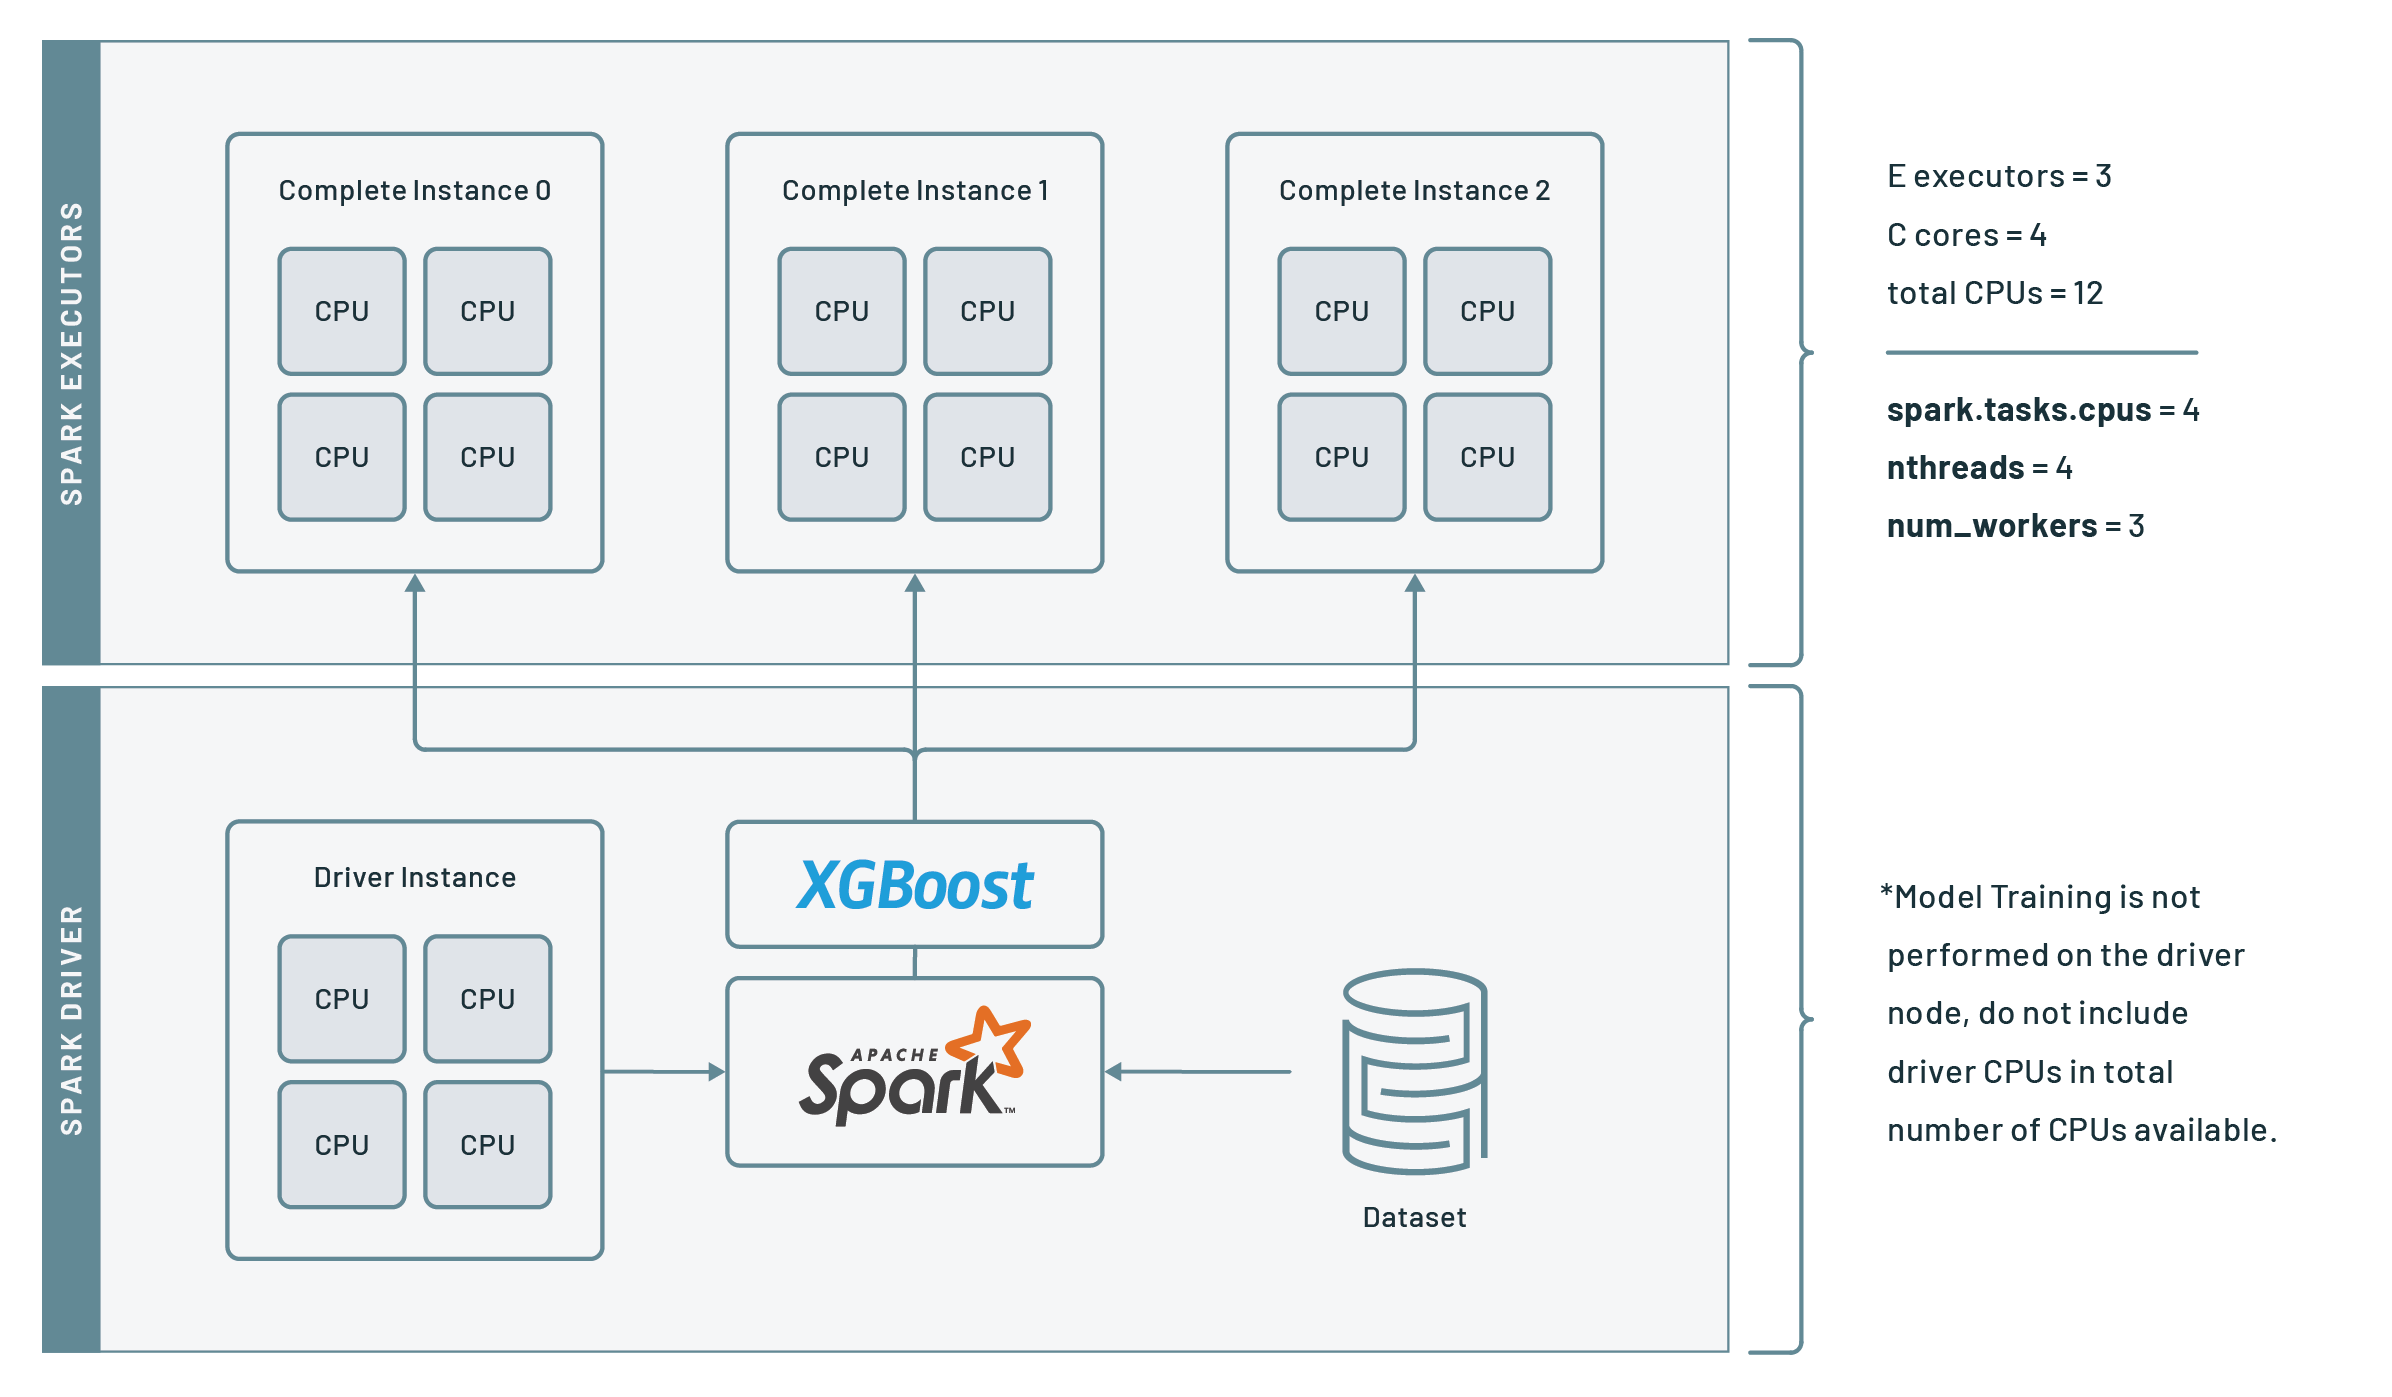 XGBoost-Spark integration solves many of the common problems with ML pipelines